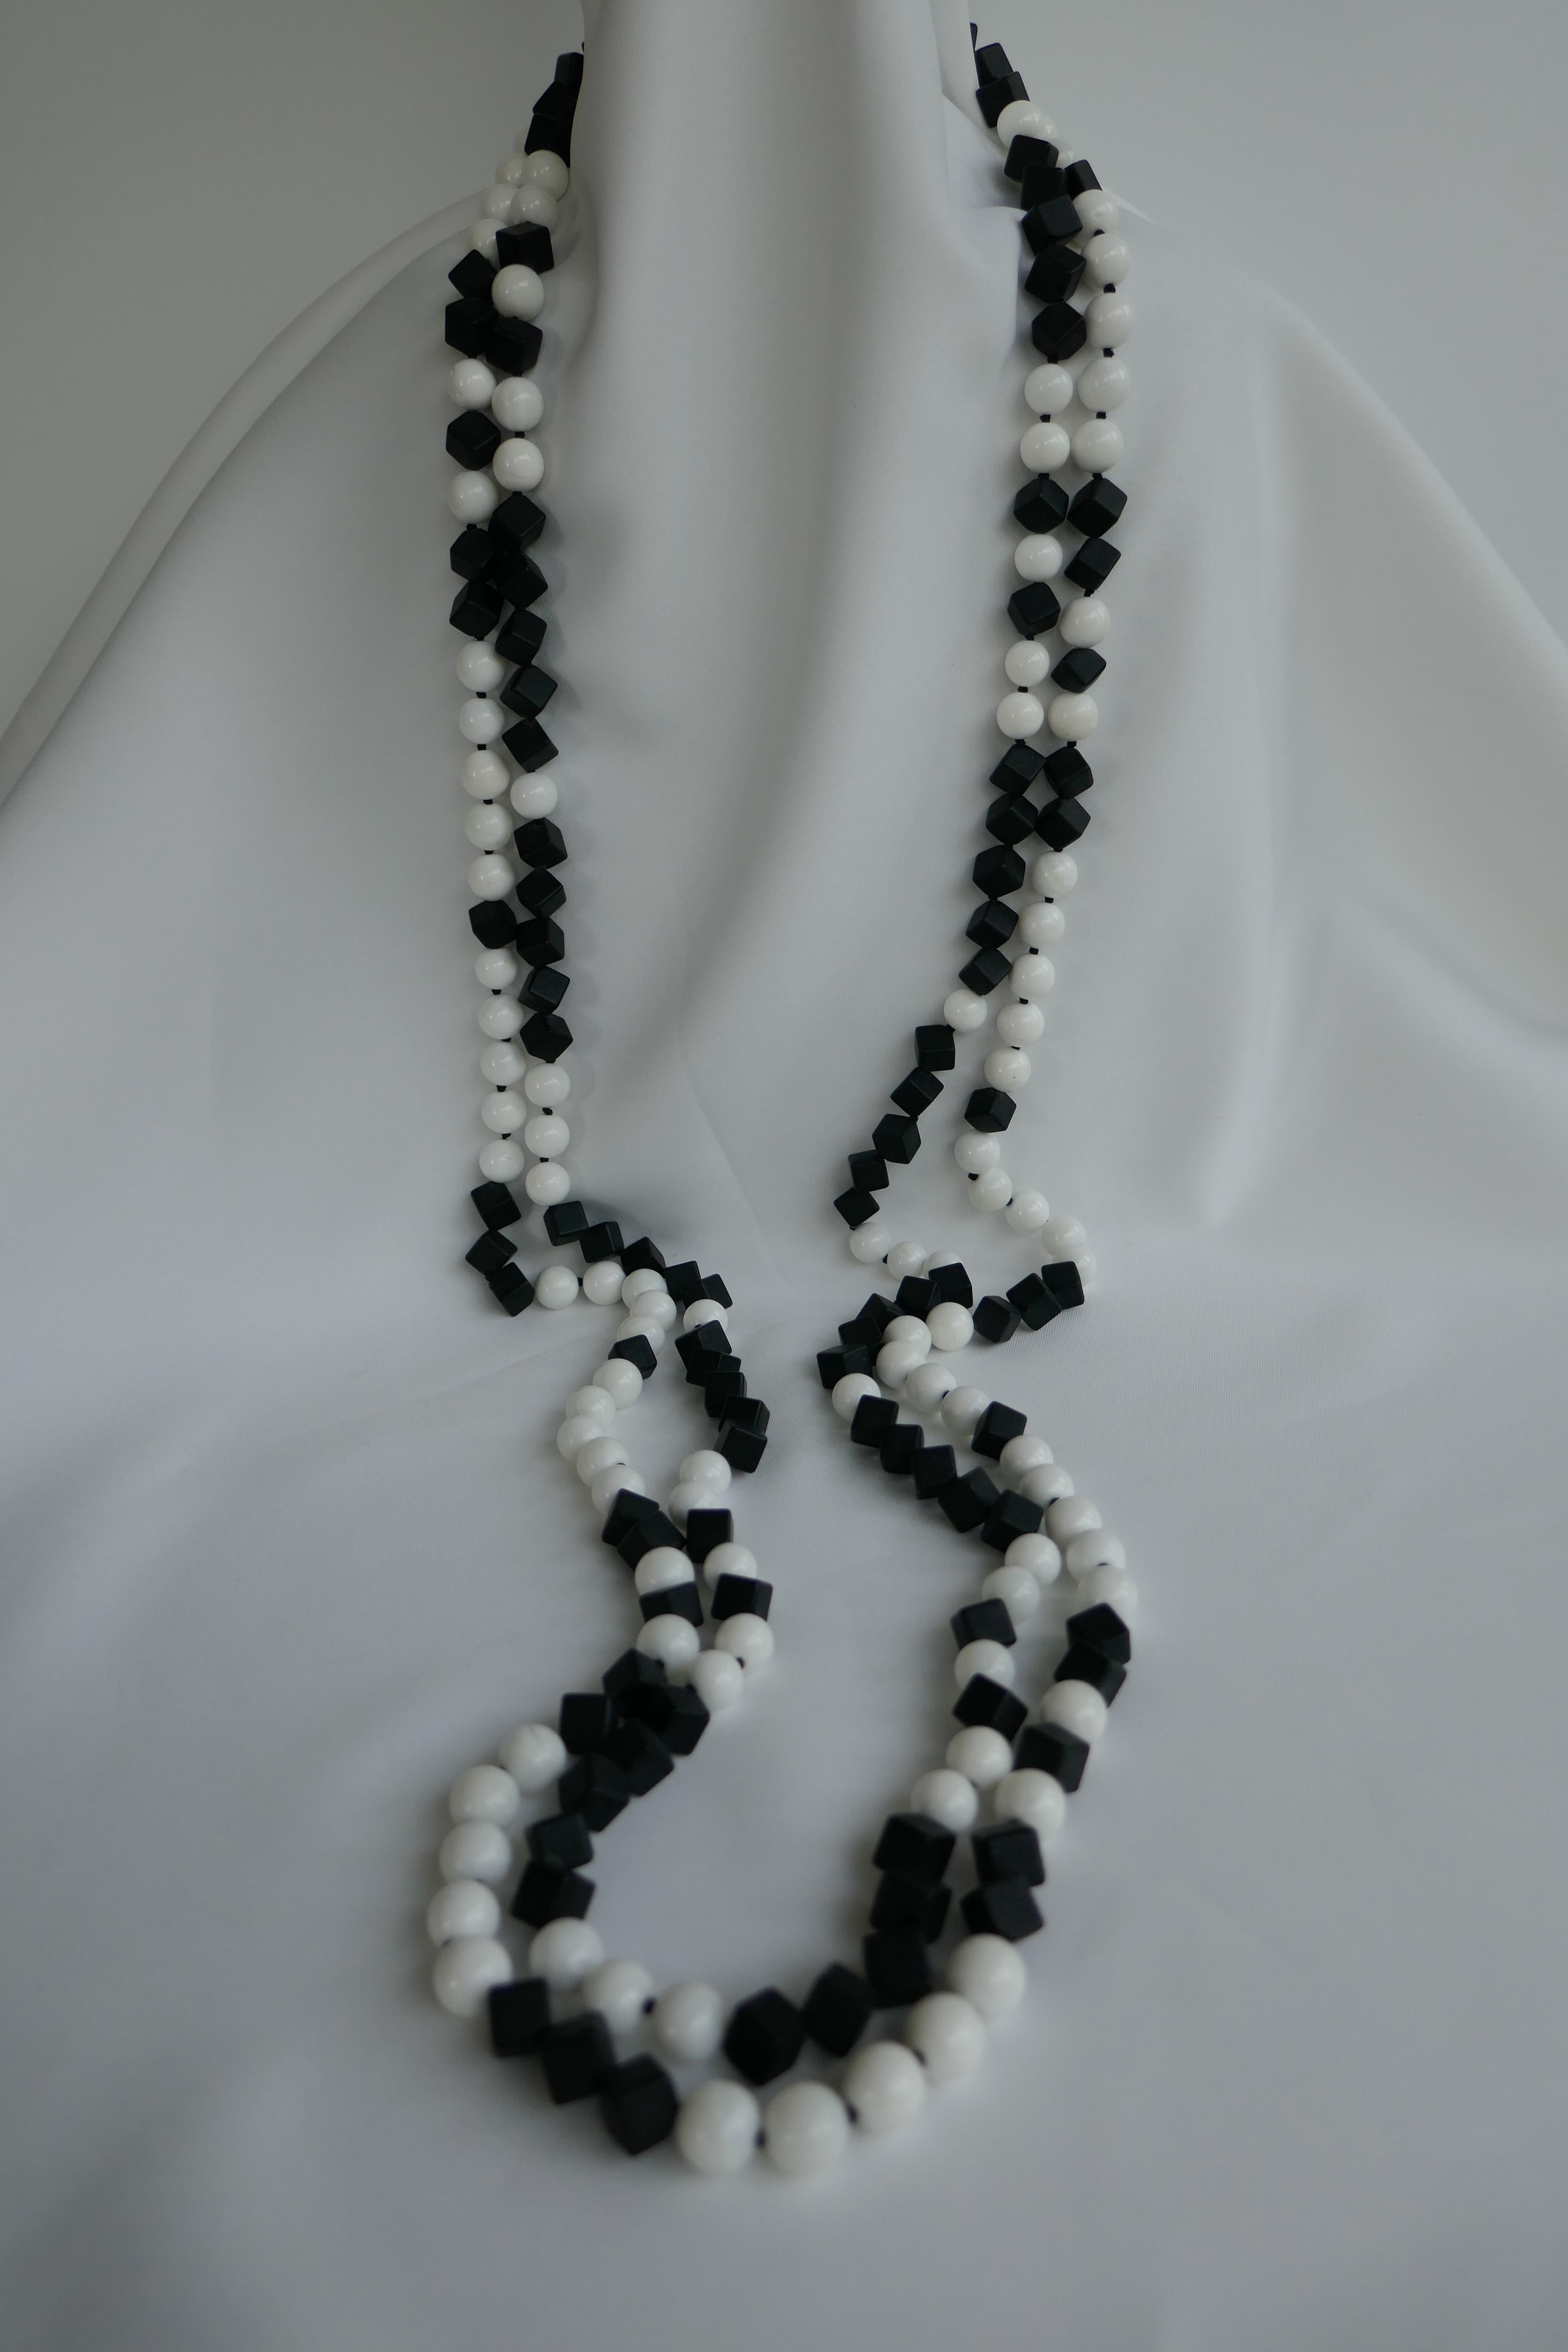 This necklace what I call a gin gang necklace. Where I have the white beads on one necklace the other has matted onyx in the same place. The matted onyx cubes are 8mm and the white shell are 10mm. This necklace is very versatile. I may be worn long,